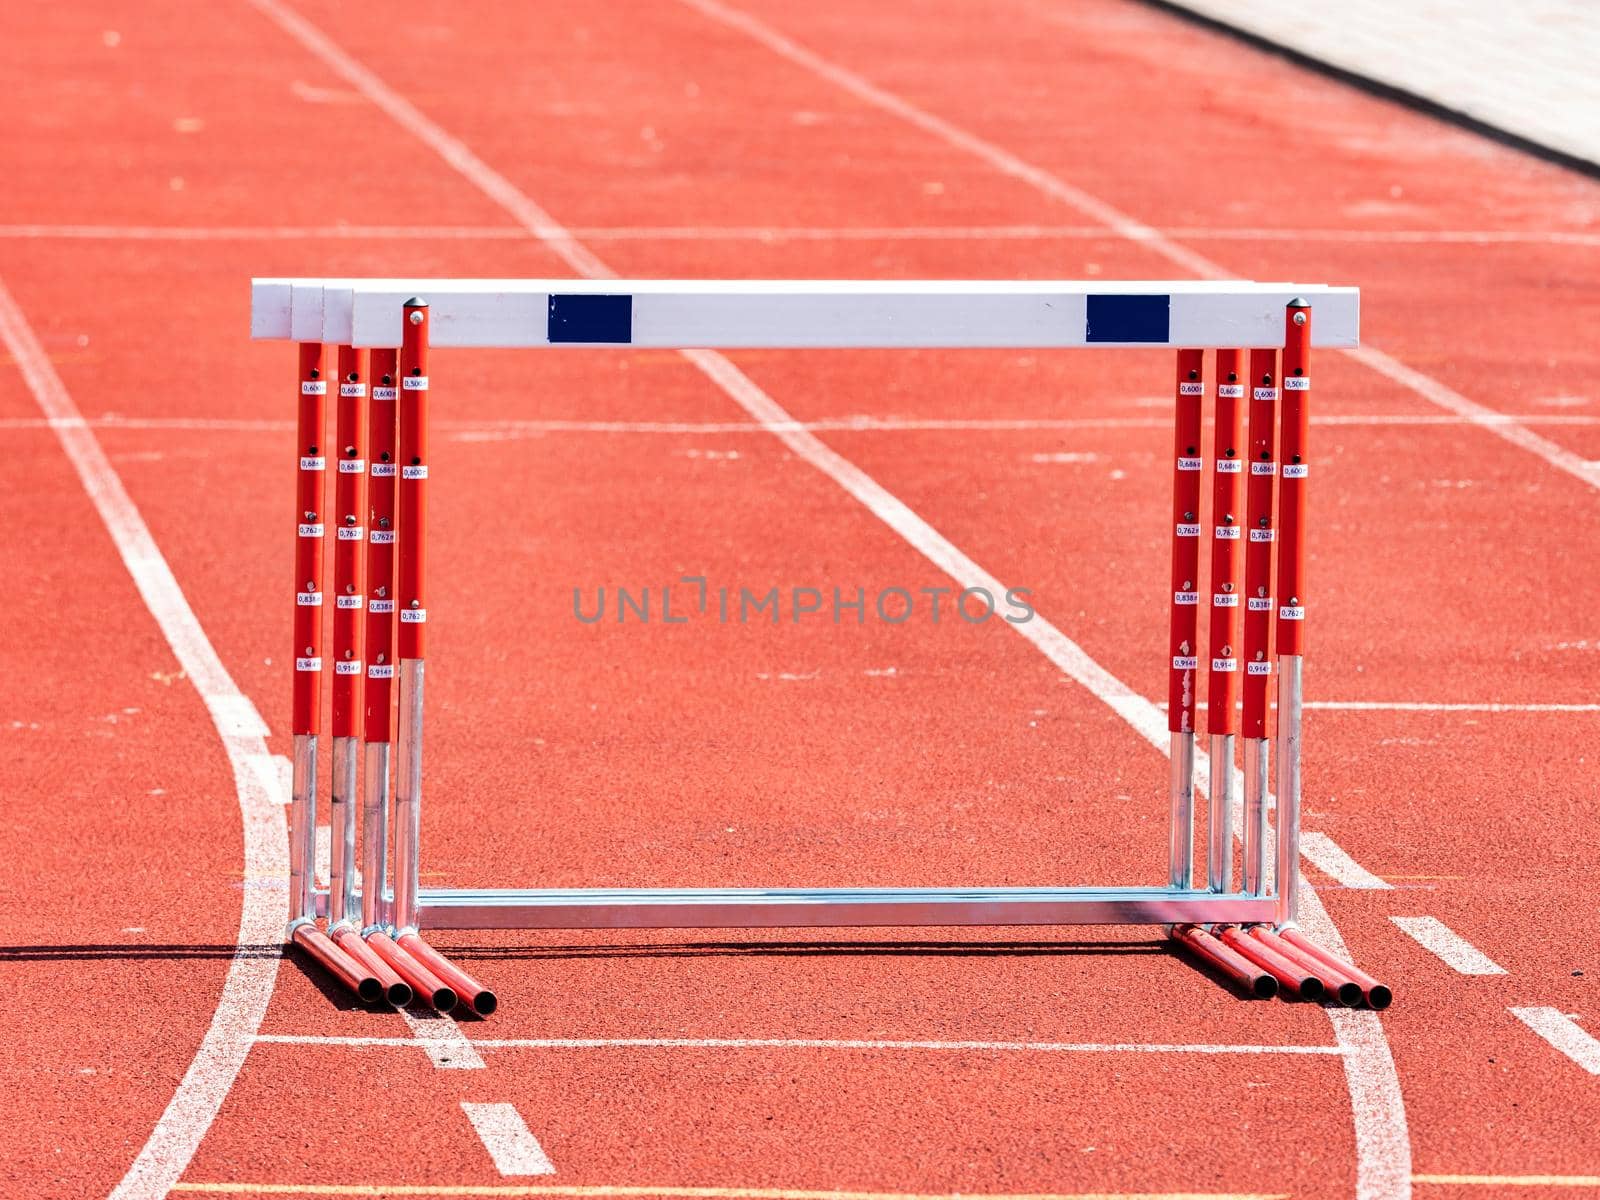 Hurdles and red running tracks in a stadion. Beginning of athletic training